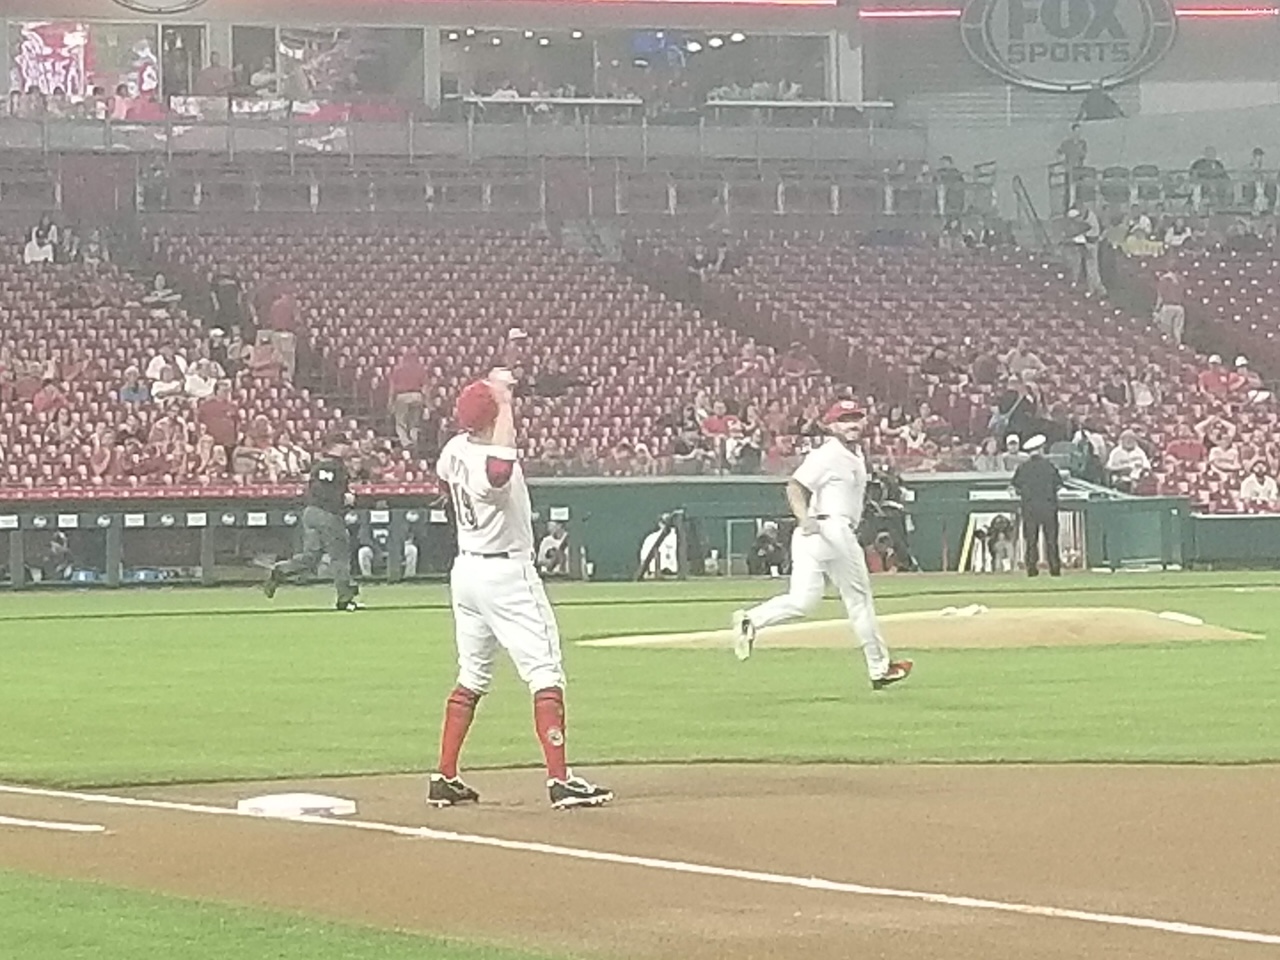 Joey Votto gets loose on a misty evening at the Great American Ball Park—rumors swirl about a future in Chicago. Could he be a Cub soon?